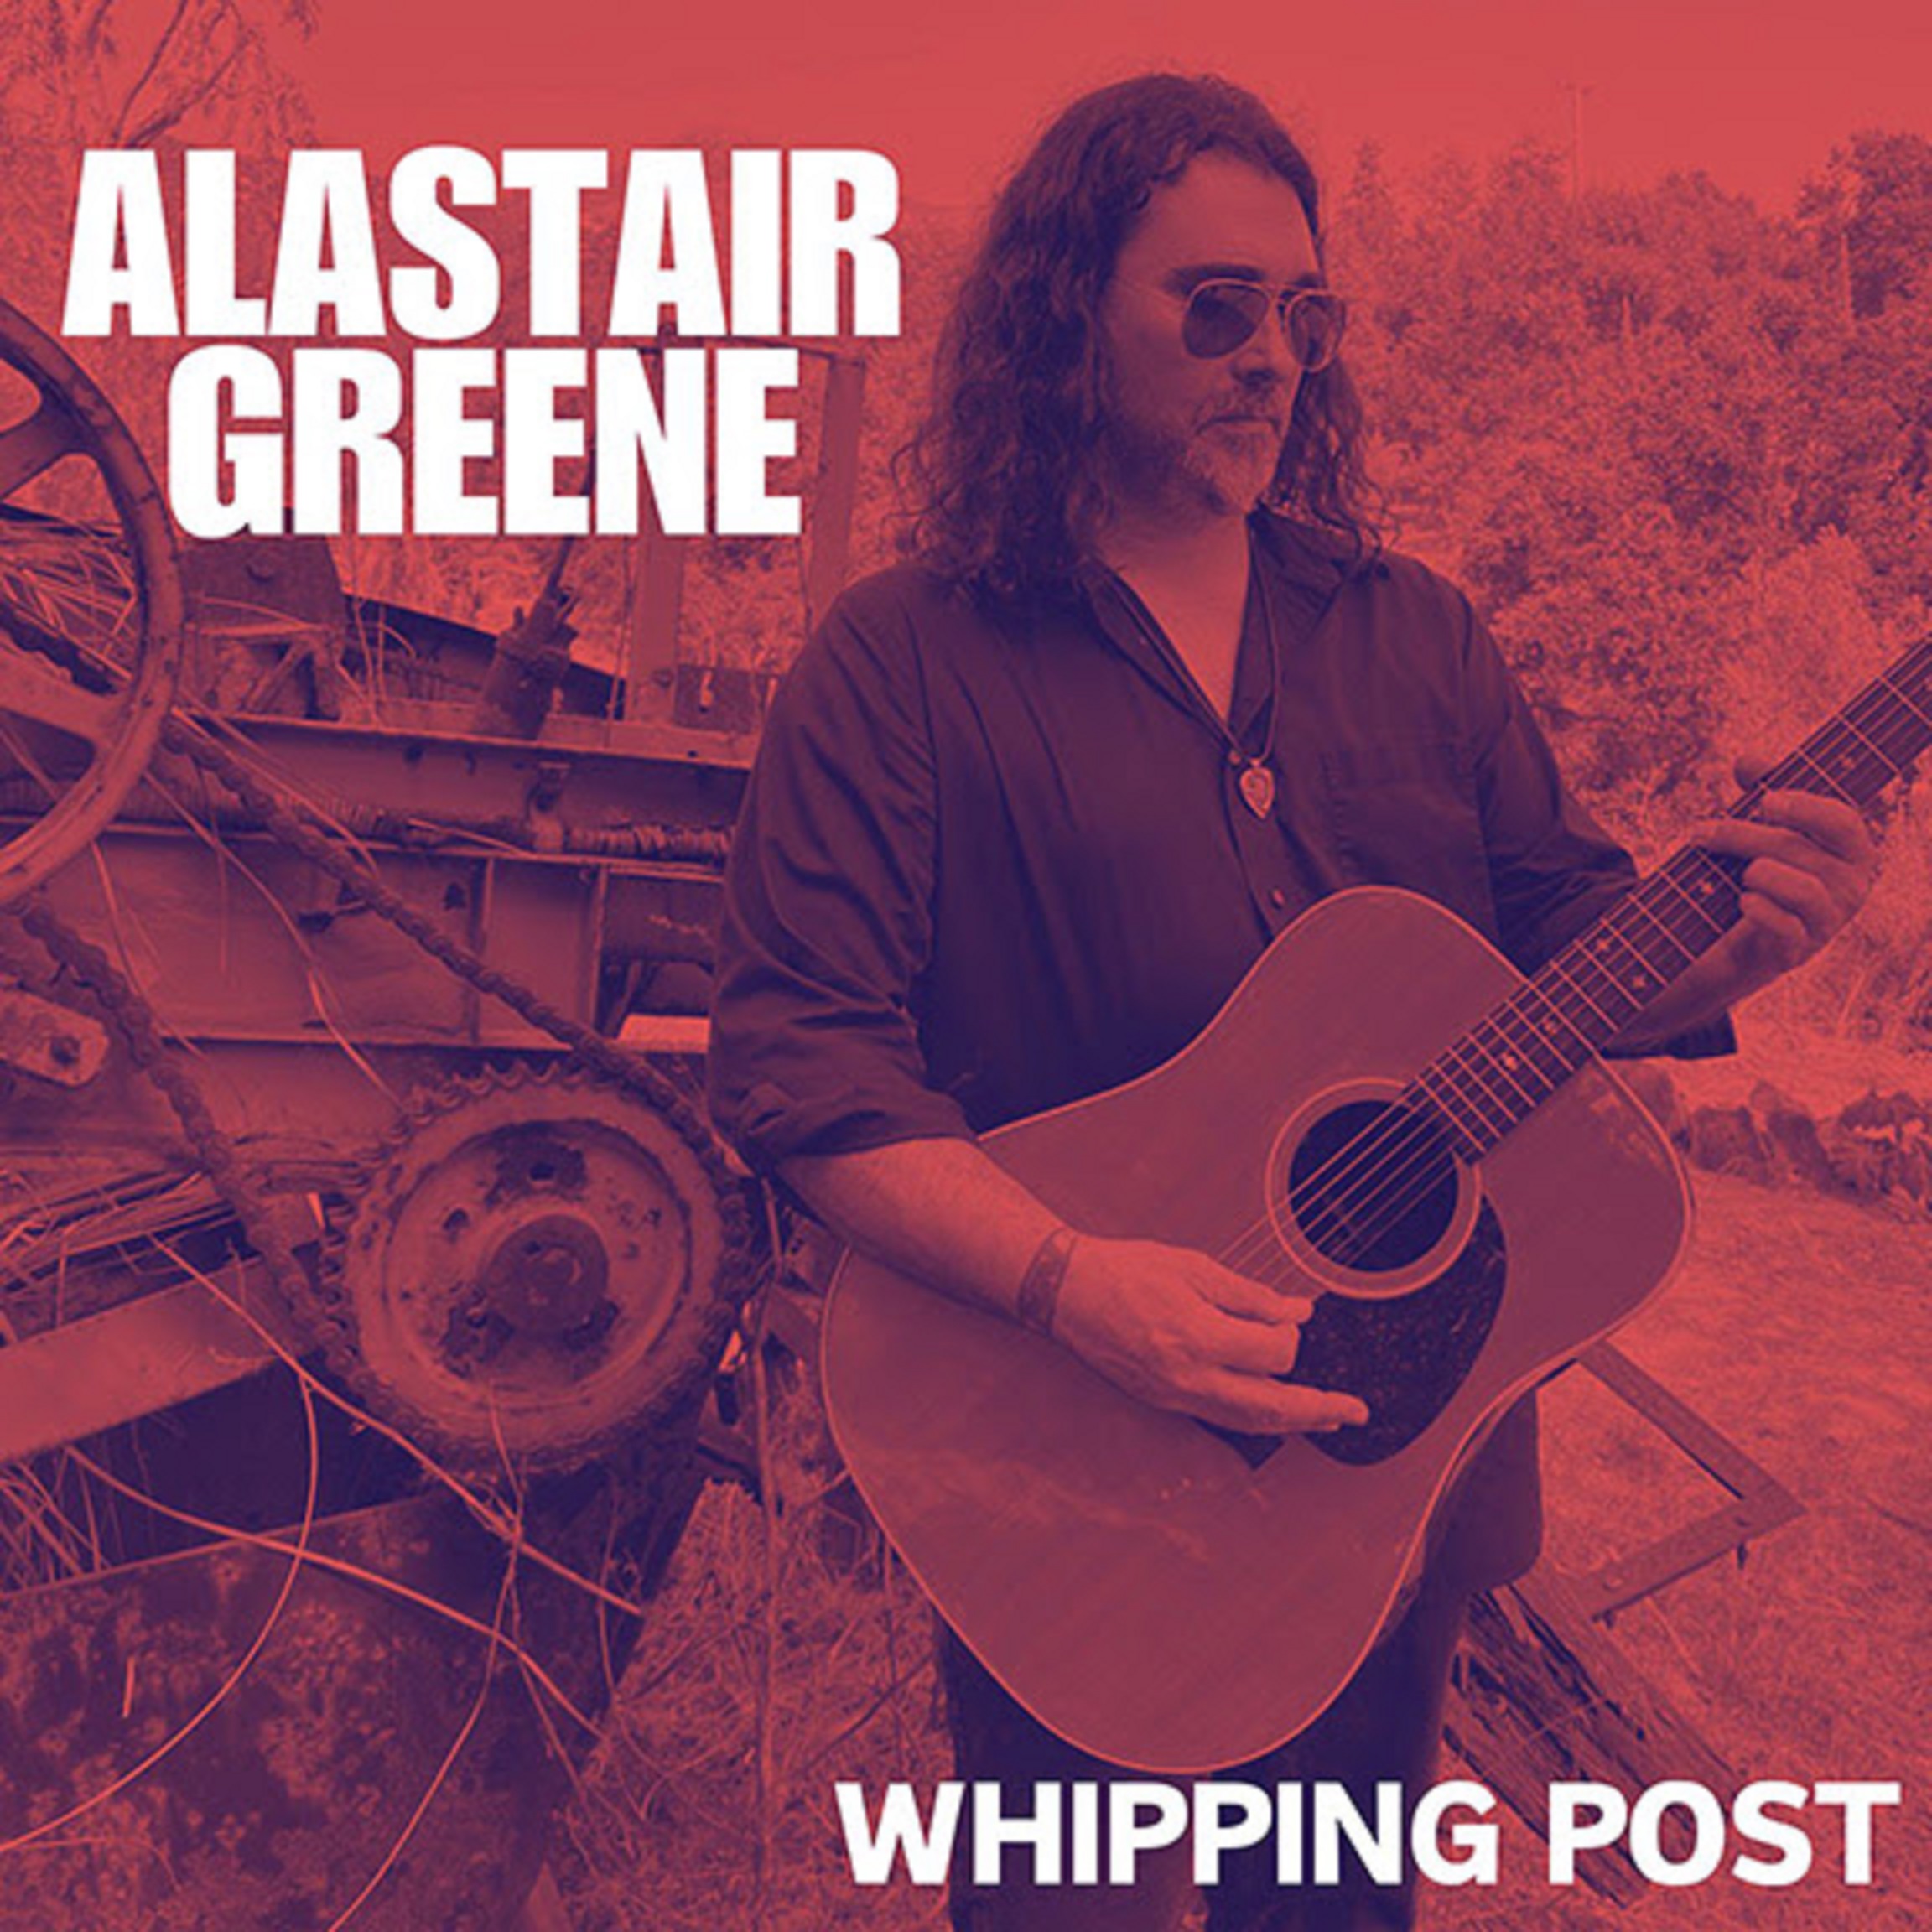 Alastair Greene Releases Solo Acoustic Rendition of Iconic Allman Brothers Song, “Whipping Post”